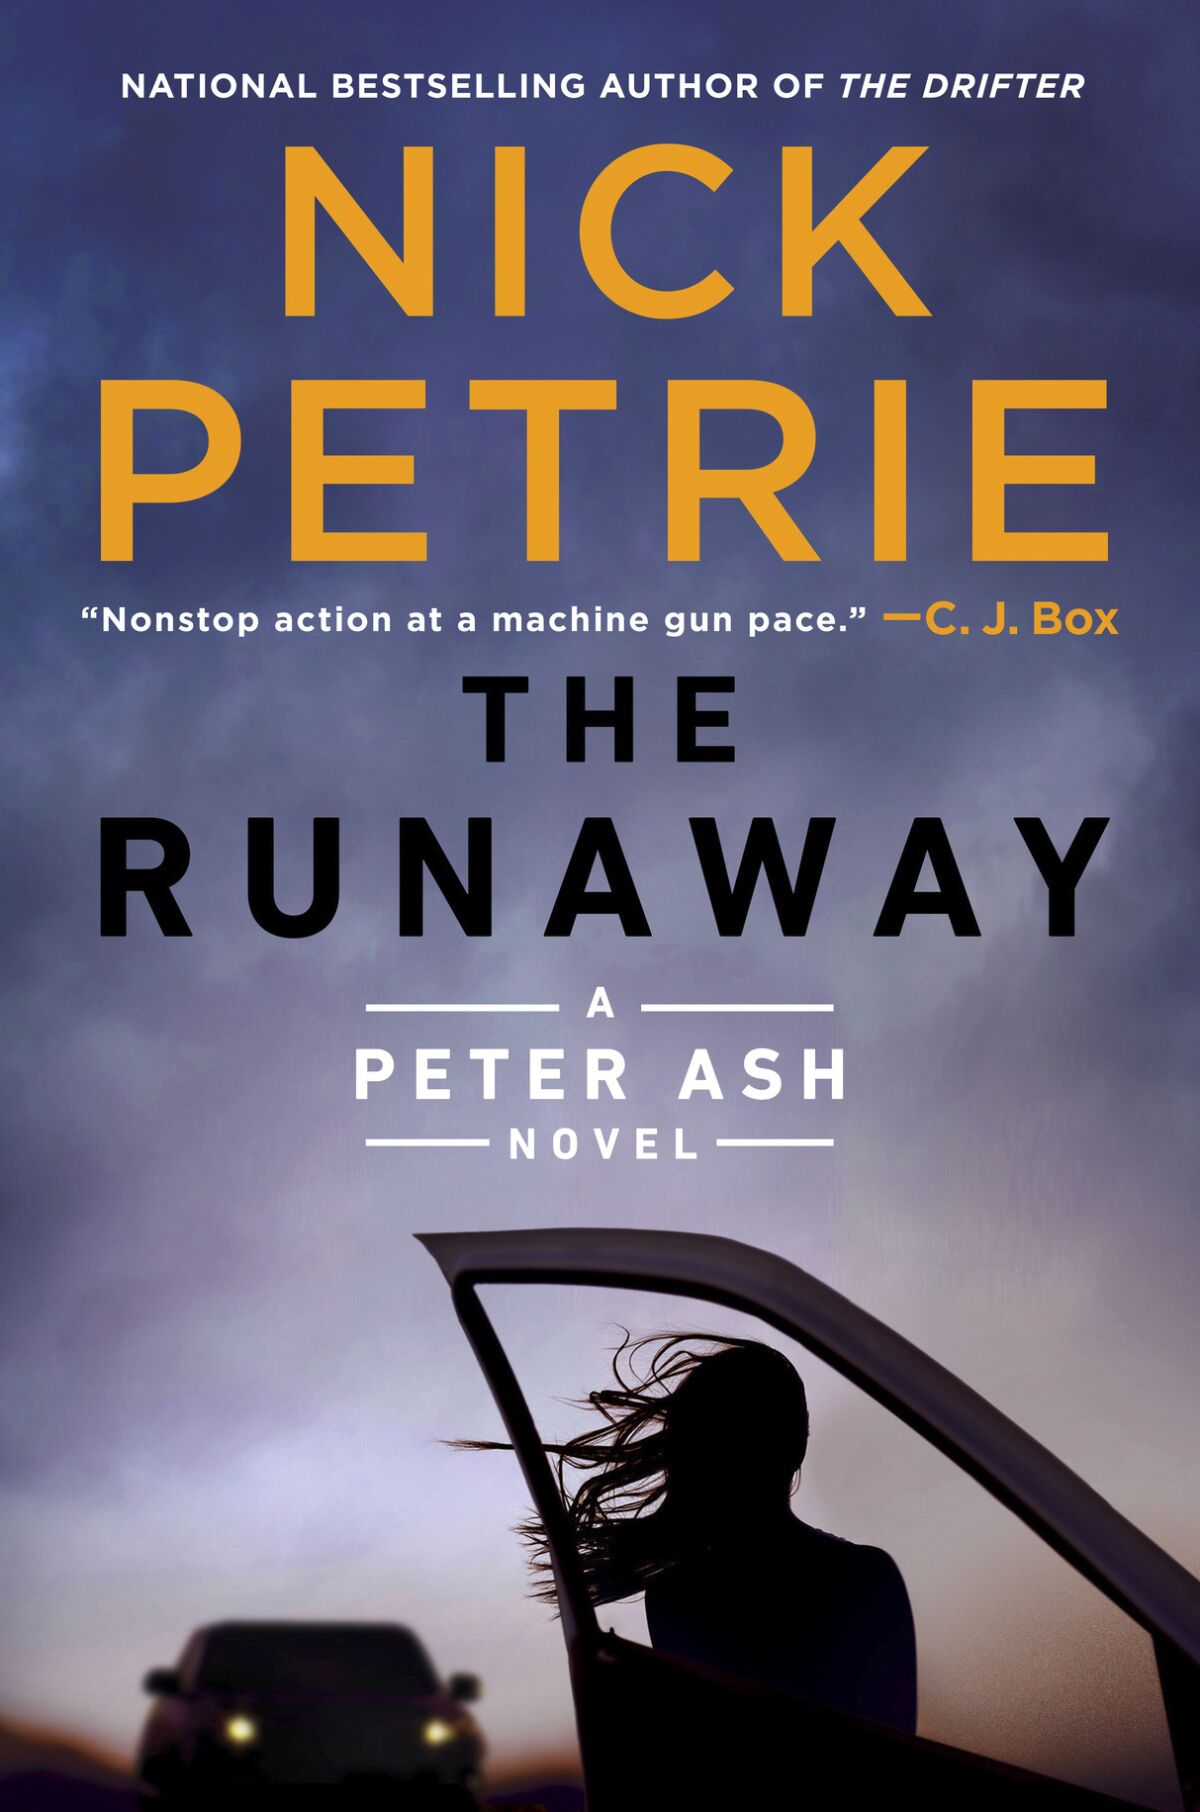 This cover image released by Putnam shows "The Runaway" by Nick Petrie. (Putnam via AP)